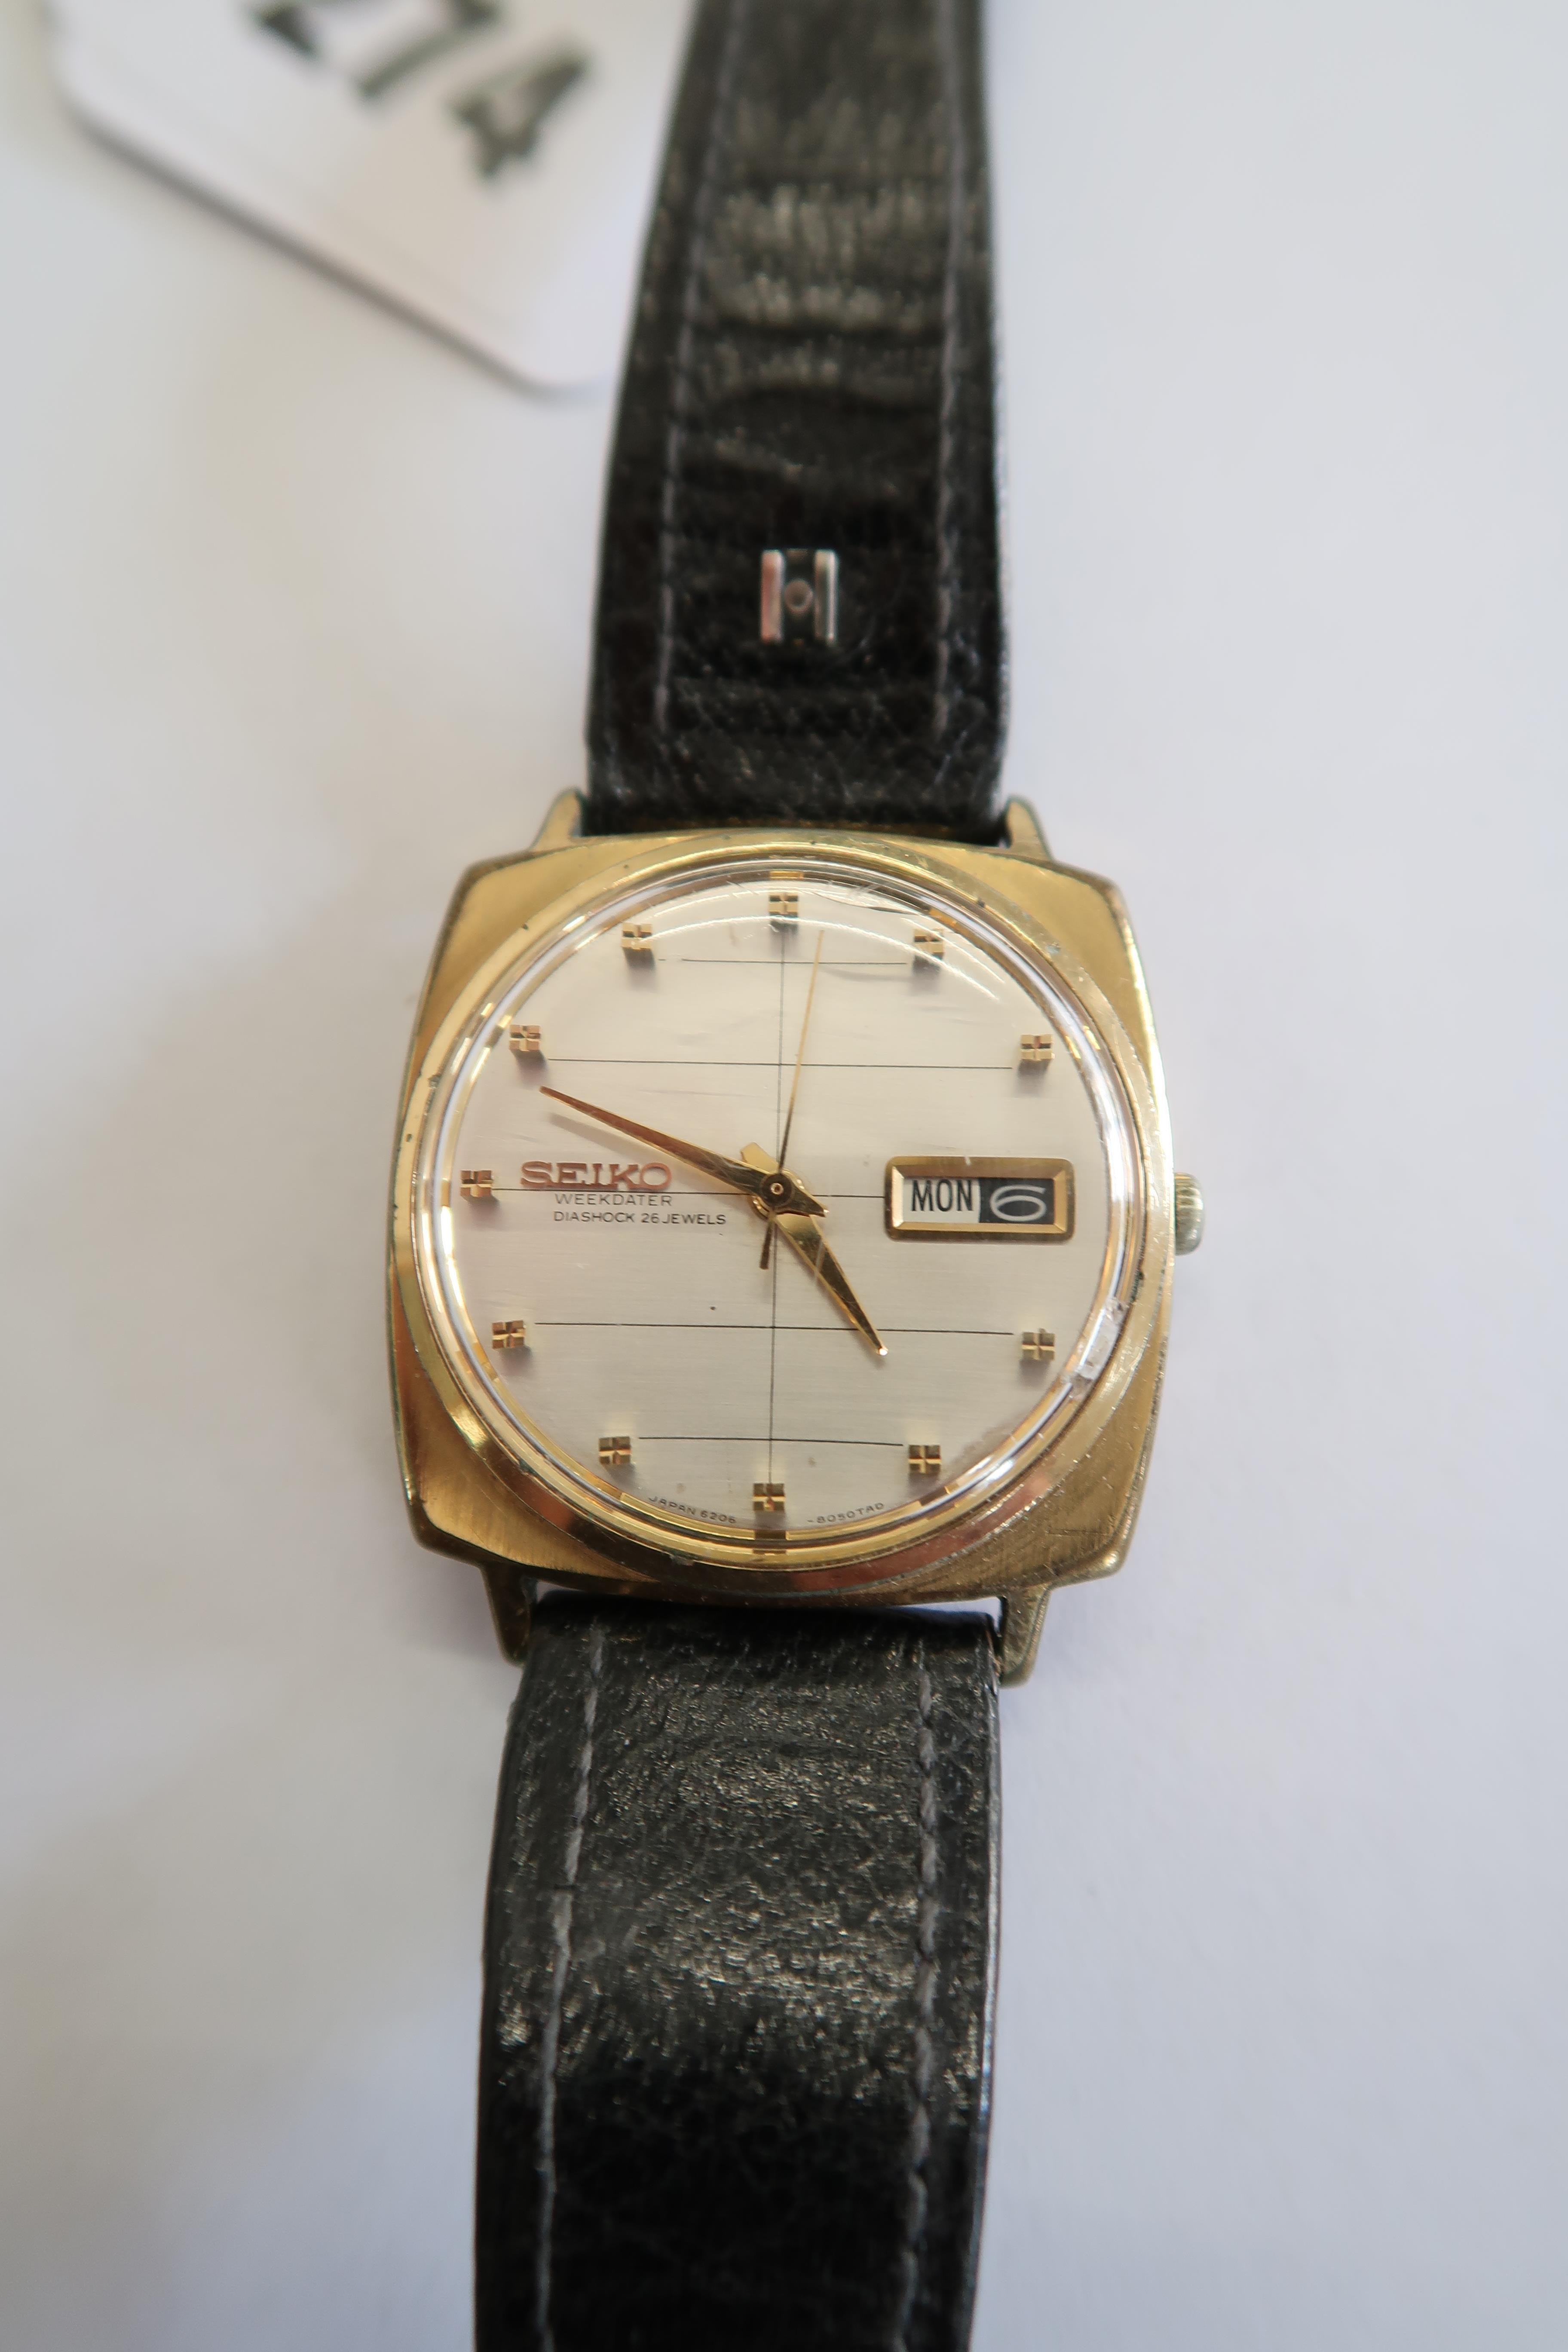 A Seiko Gents wristwatch on a leather strap, working in saleroom